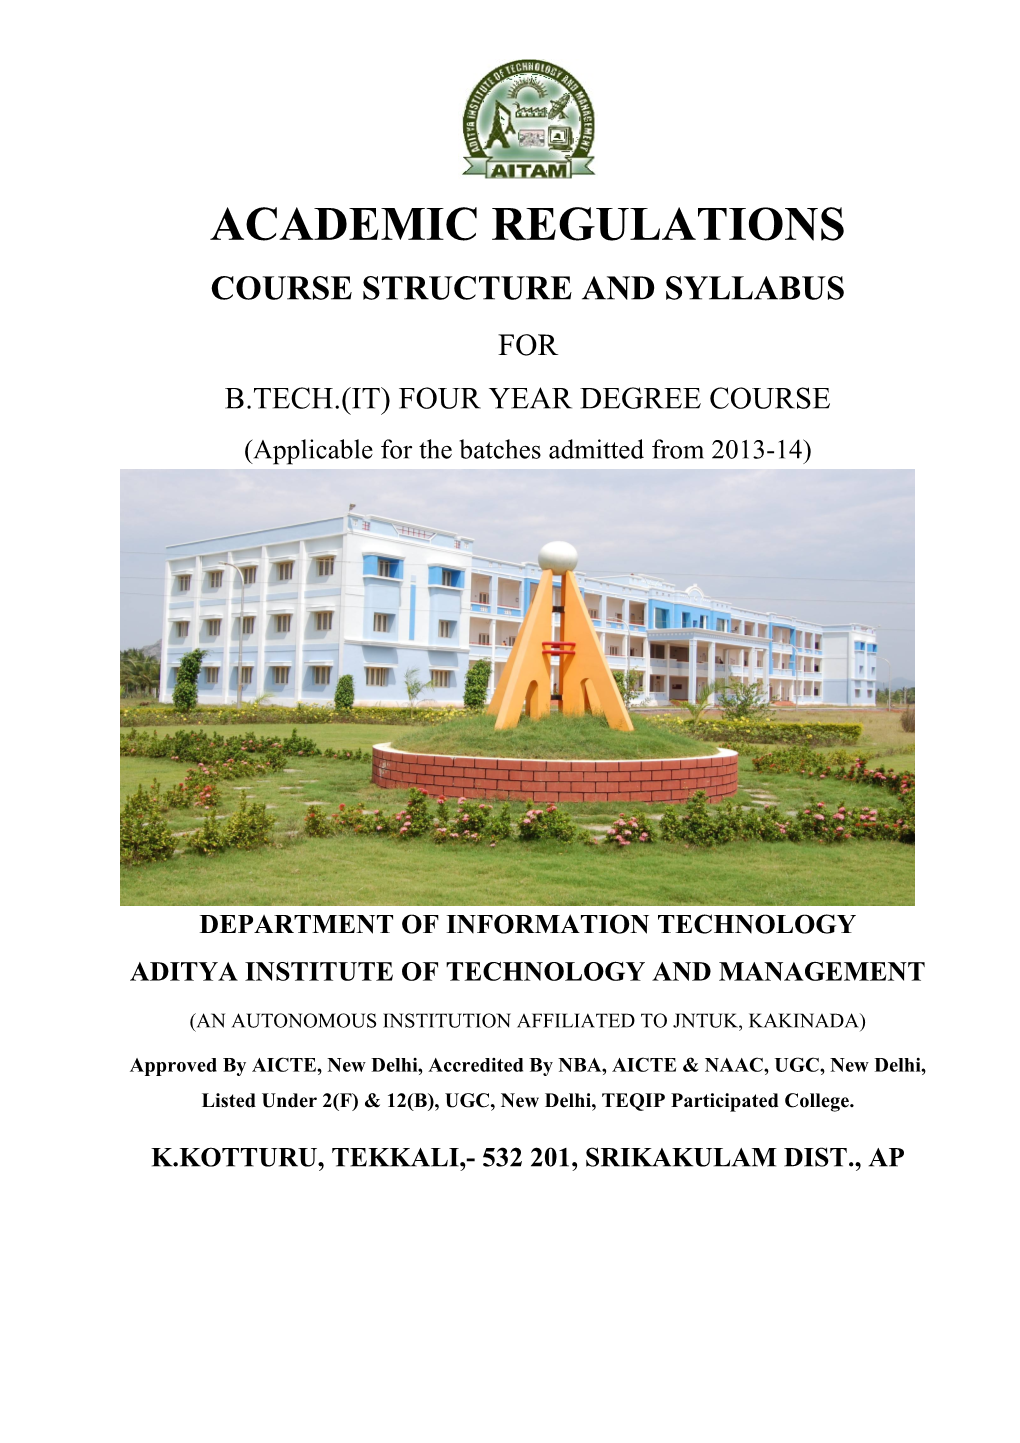 Course Structure and Syllabus